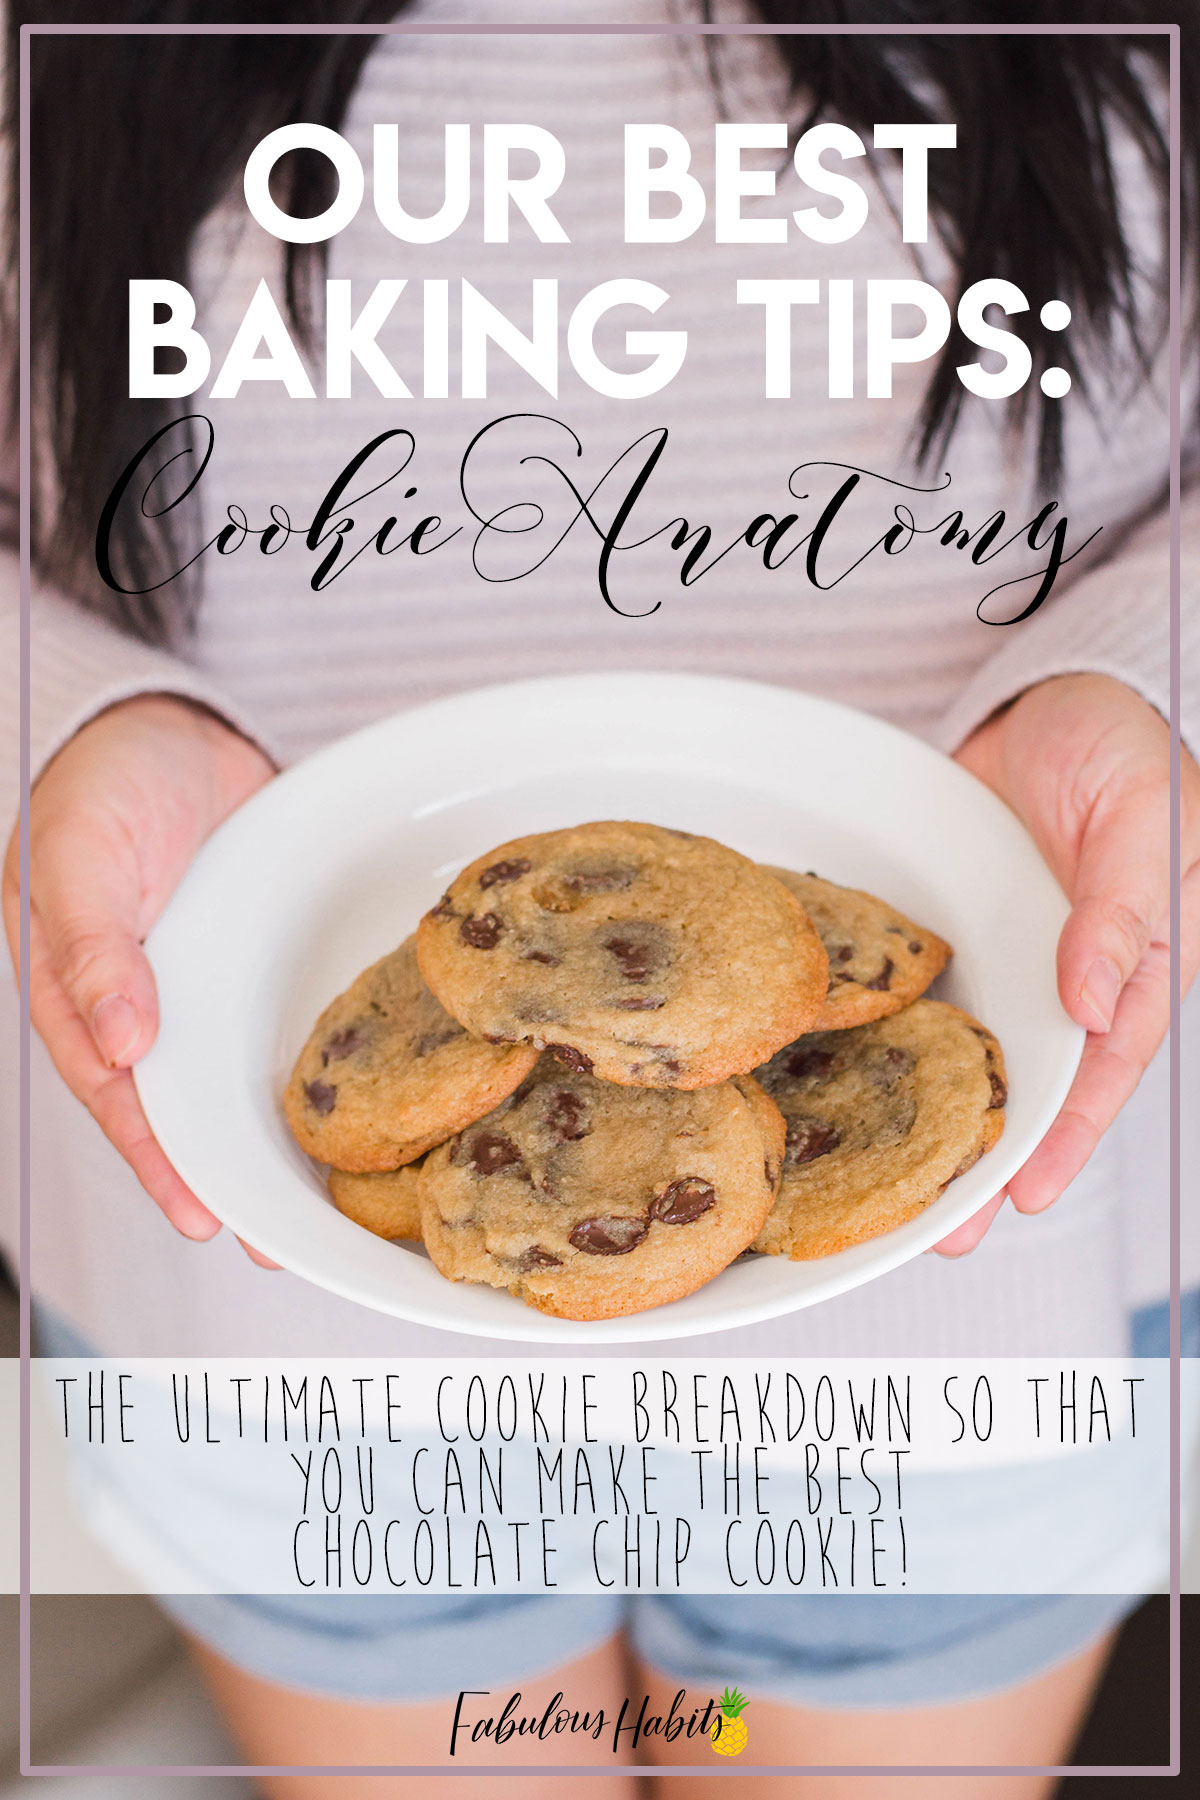 Here's the cookie breakdown: all of our best tips for baking cookies as we examine the anatomy of the chocolate chip cookie.